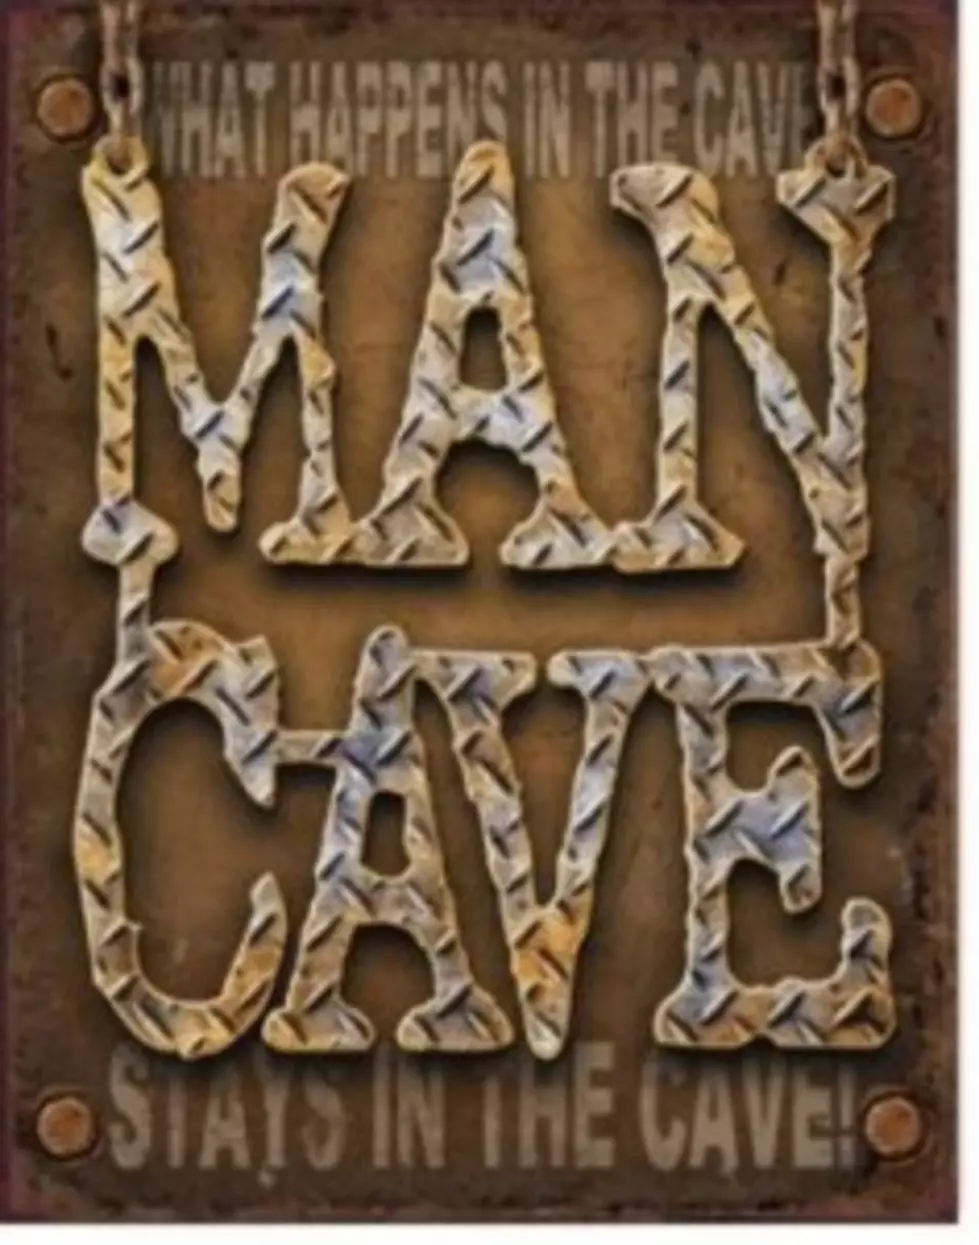 Win A Man Cave Prize Pack For The Man In Your Life!